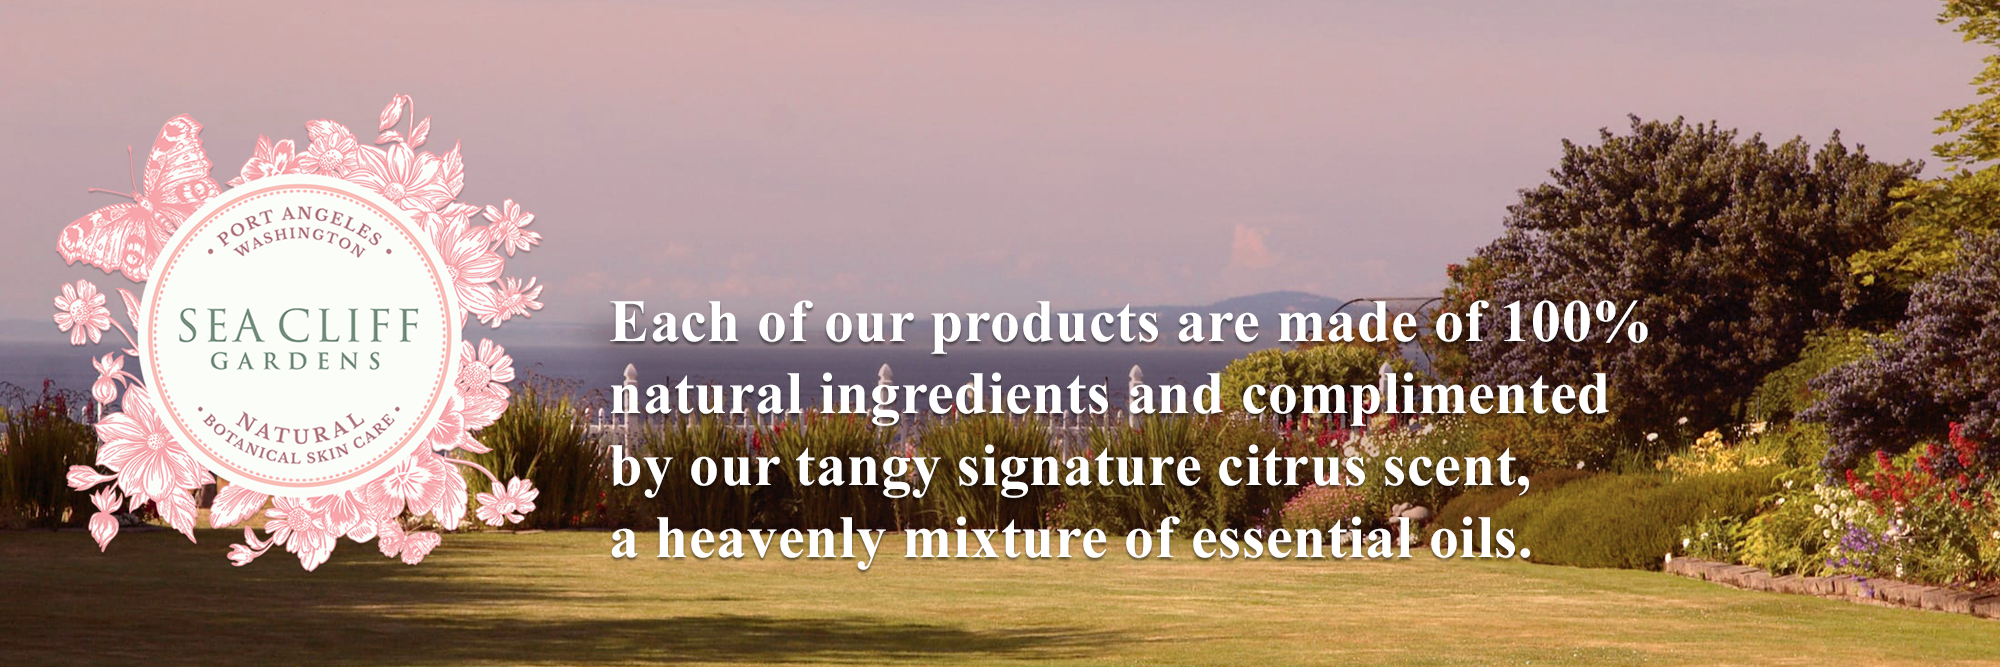 Our products are made of 100% natural ingredients and complimented by our signature citrus scent.